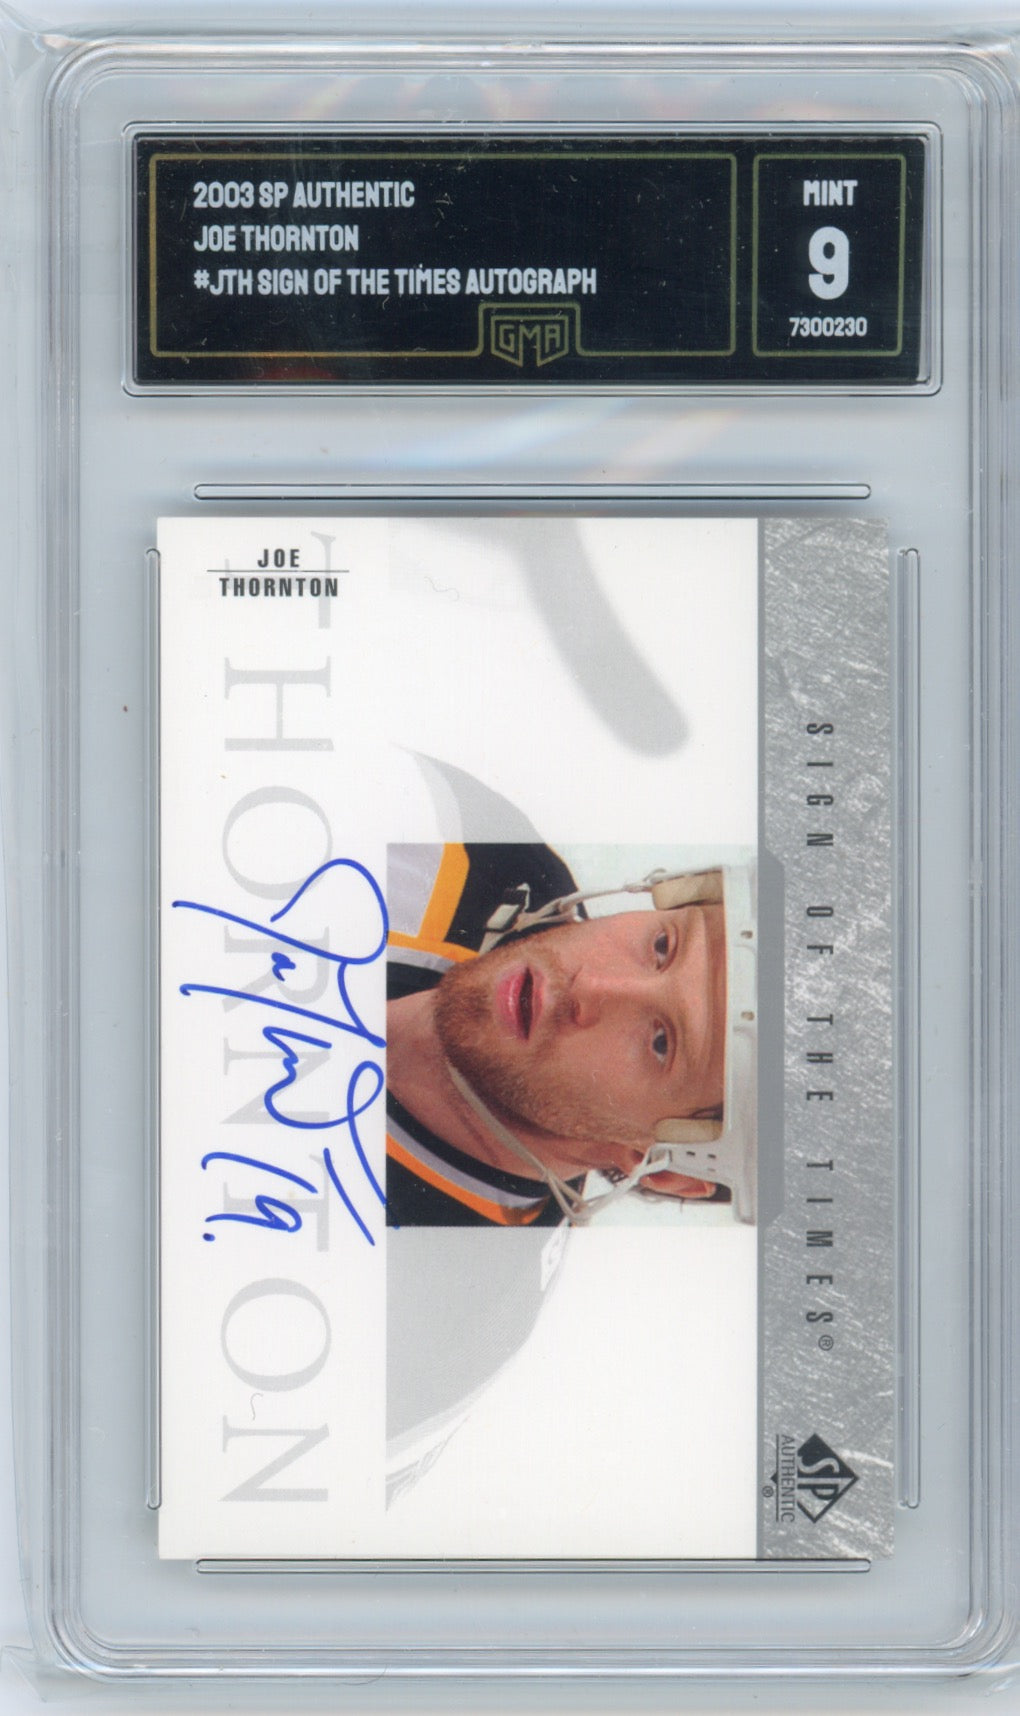 2003 SP Authentic Joe Thornton #JTH Sign Of The Times Autograph GMA 9